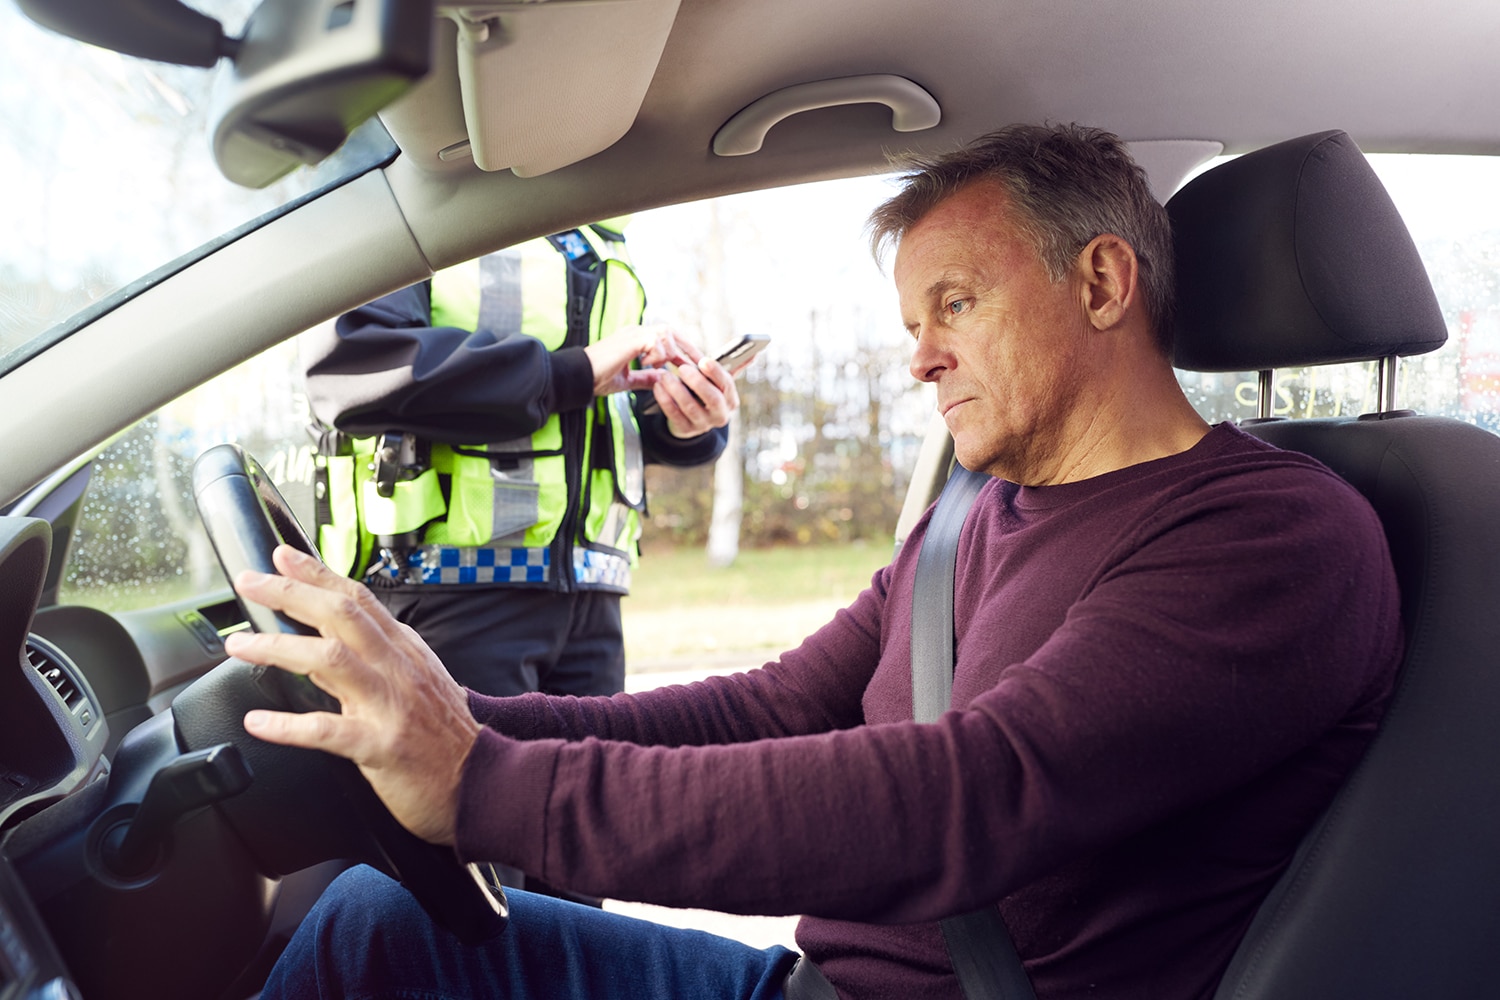 What are the penalties for DUI and impaired driving in Ontario